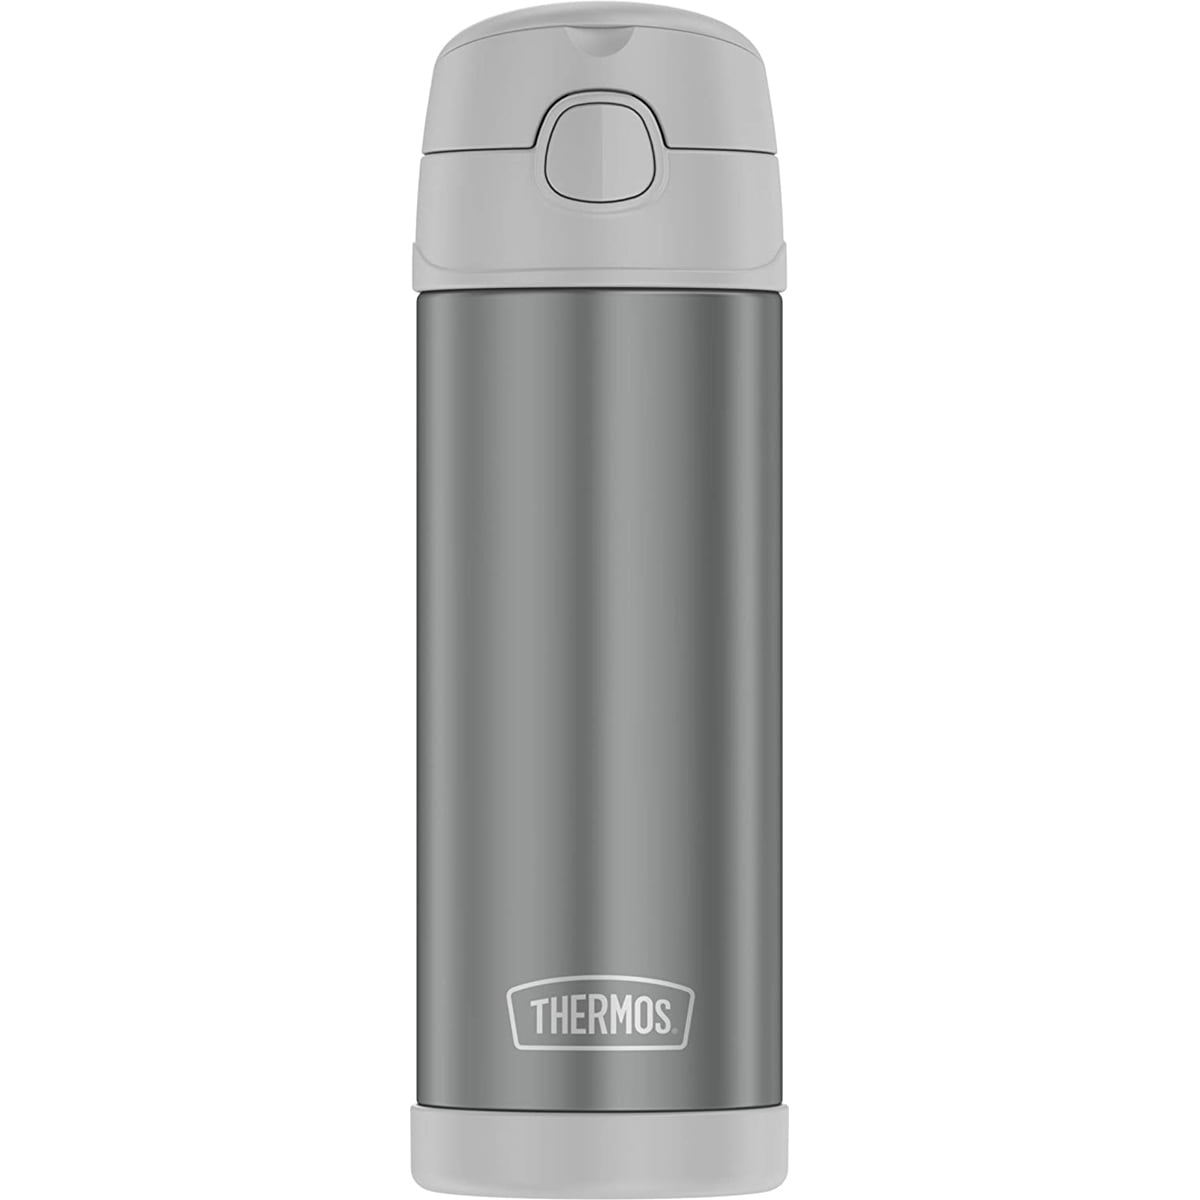 Thermos Carrier with 12 Ounce Thermos – Atomic Goods